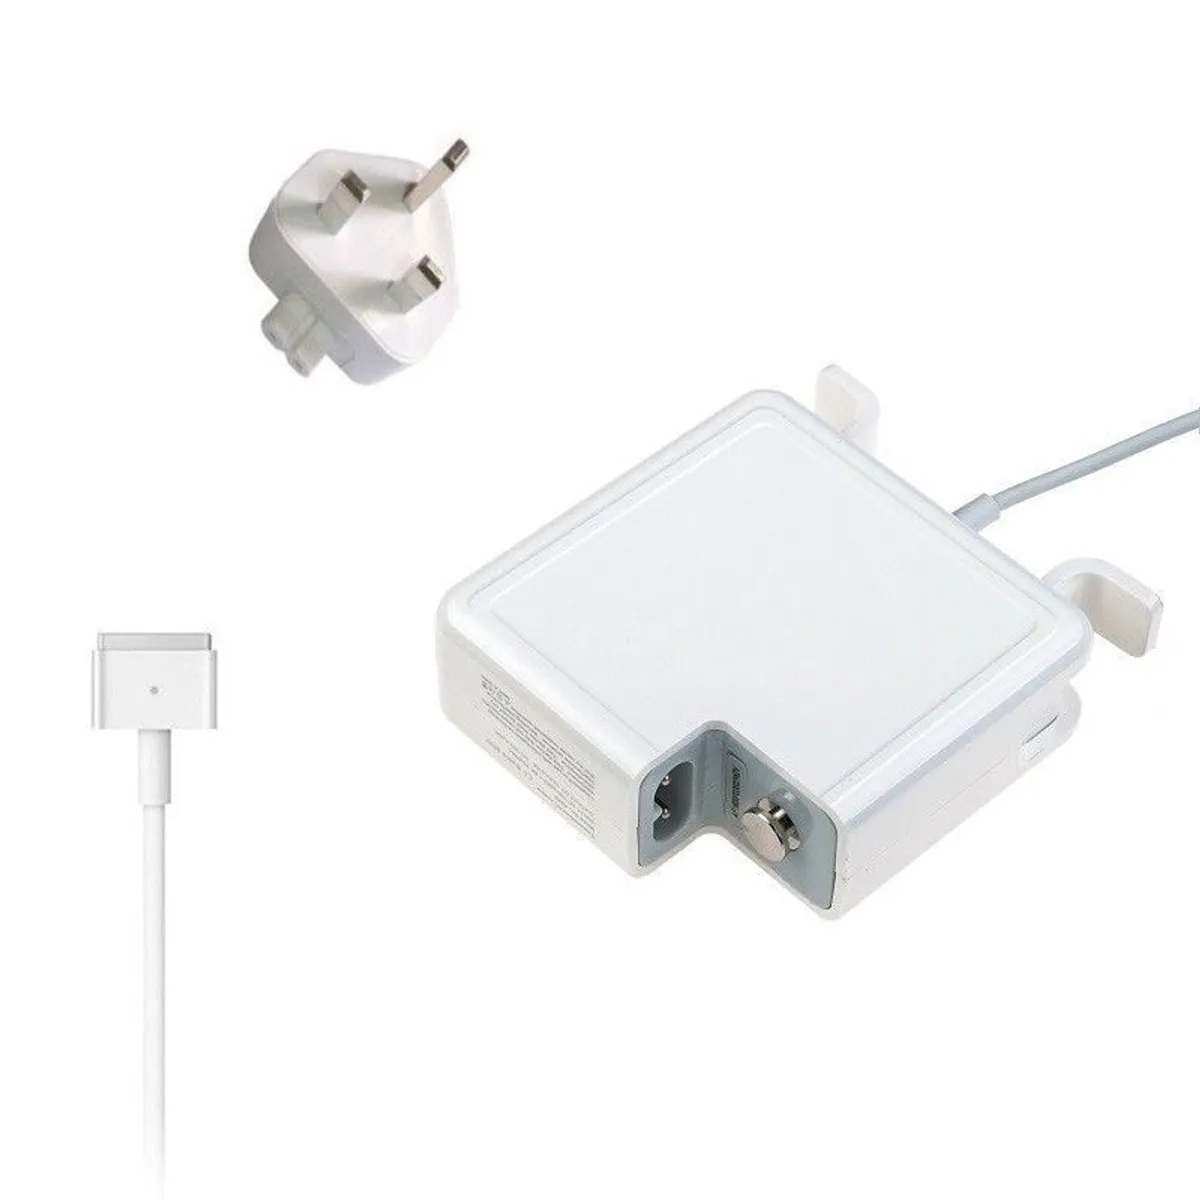 45W T Power Charger Adapter For Apple Magsafe 2 Mac Macbook Air 13/11 A1466/1465 (14.85V, 3.05A)